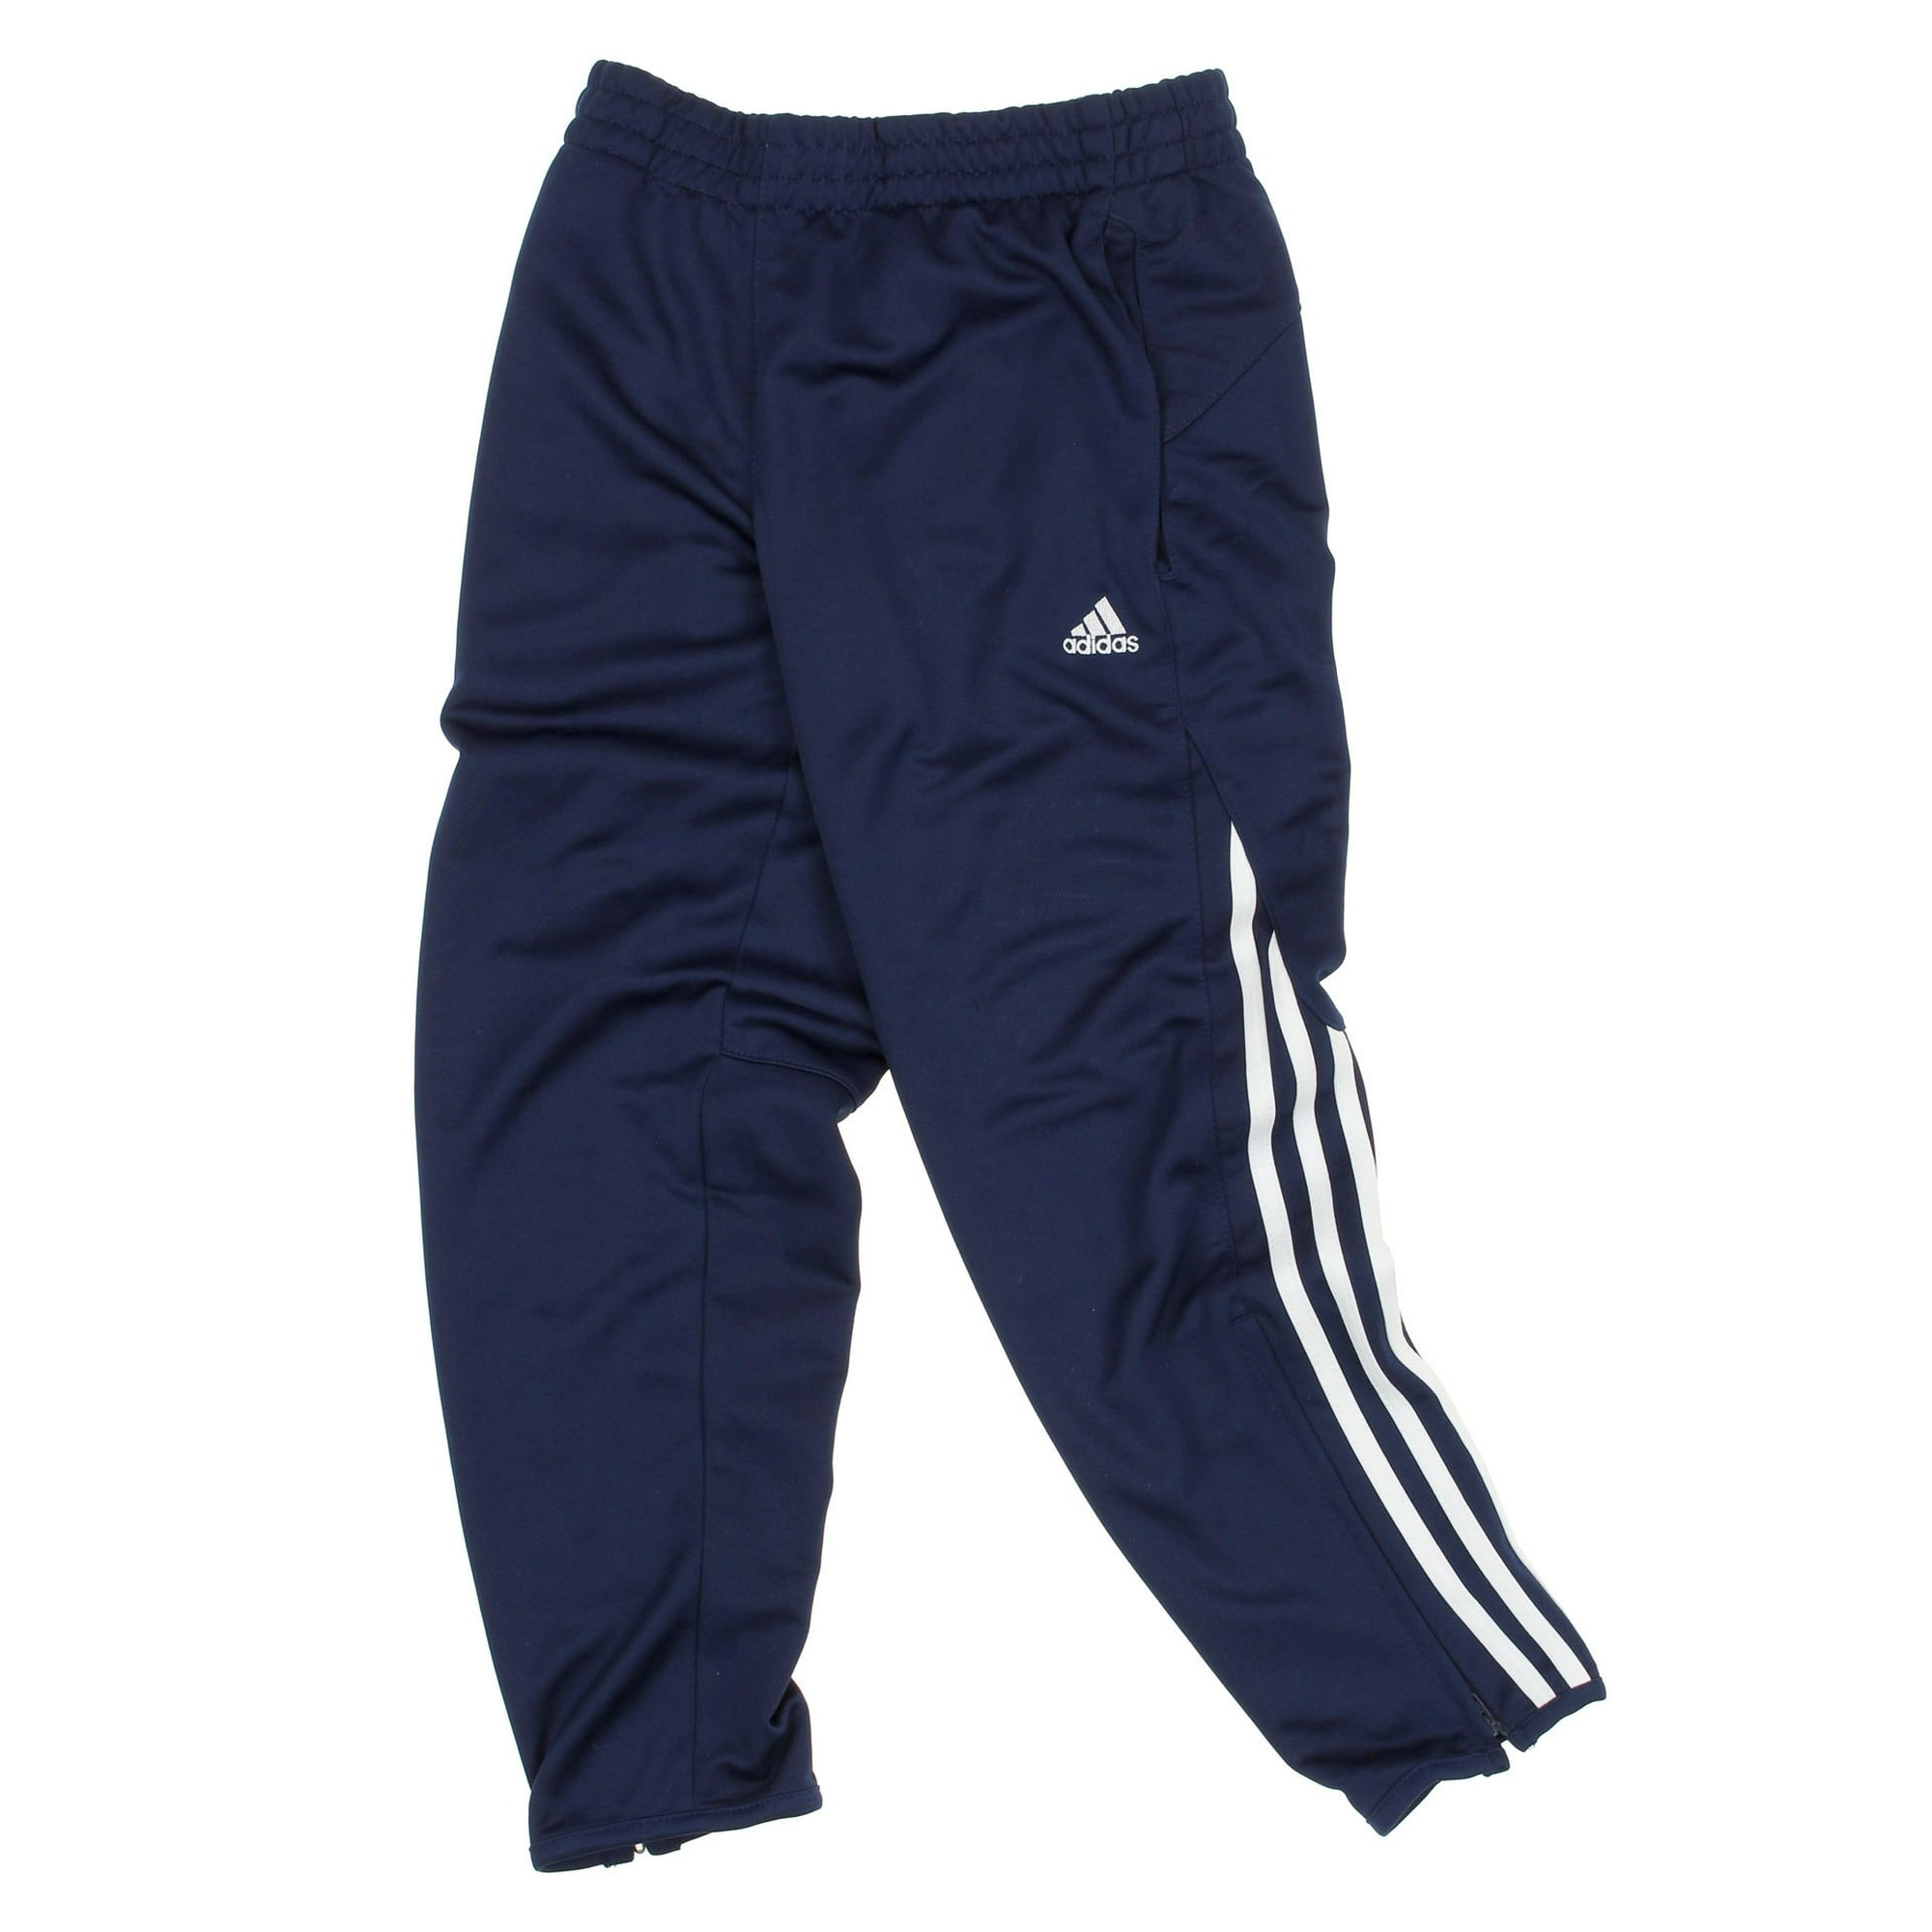 repetition Unravel Mob Adidas Youth Climalite Field Pants, 2 Color Options - Walmart.com